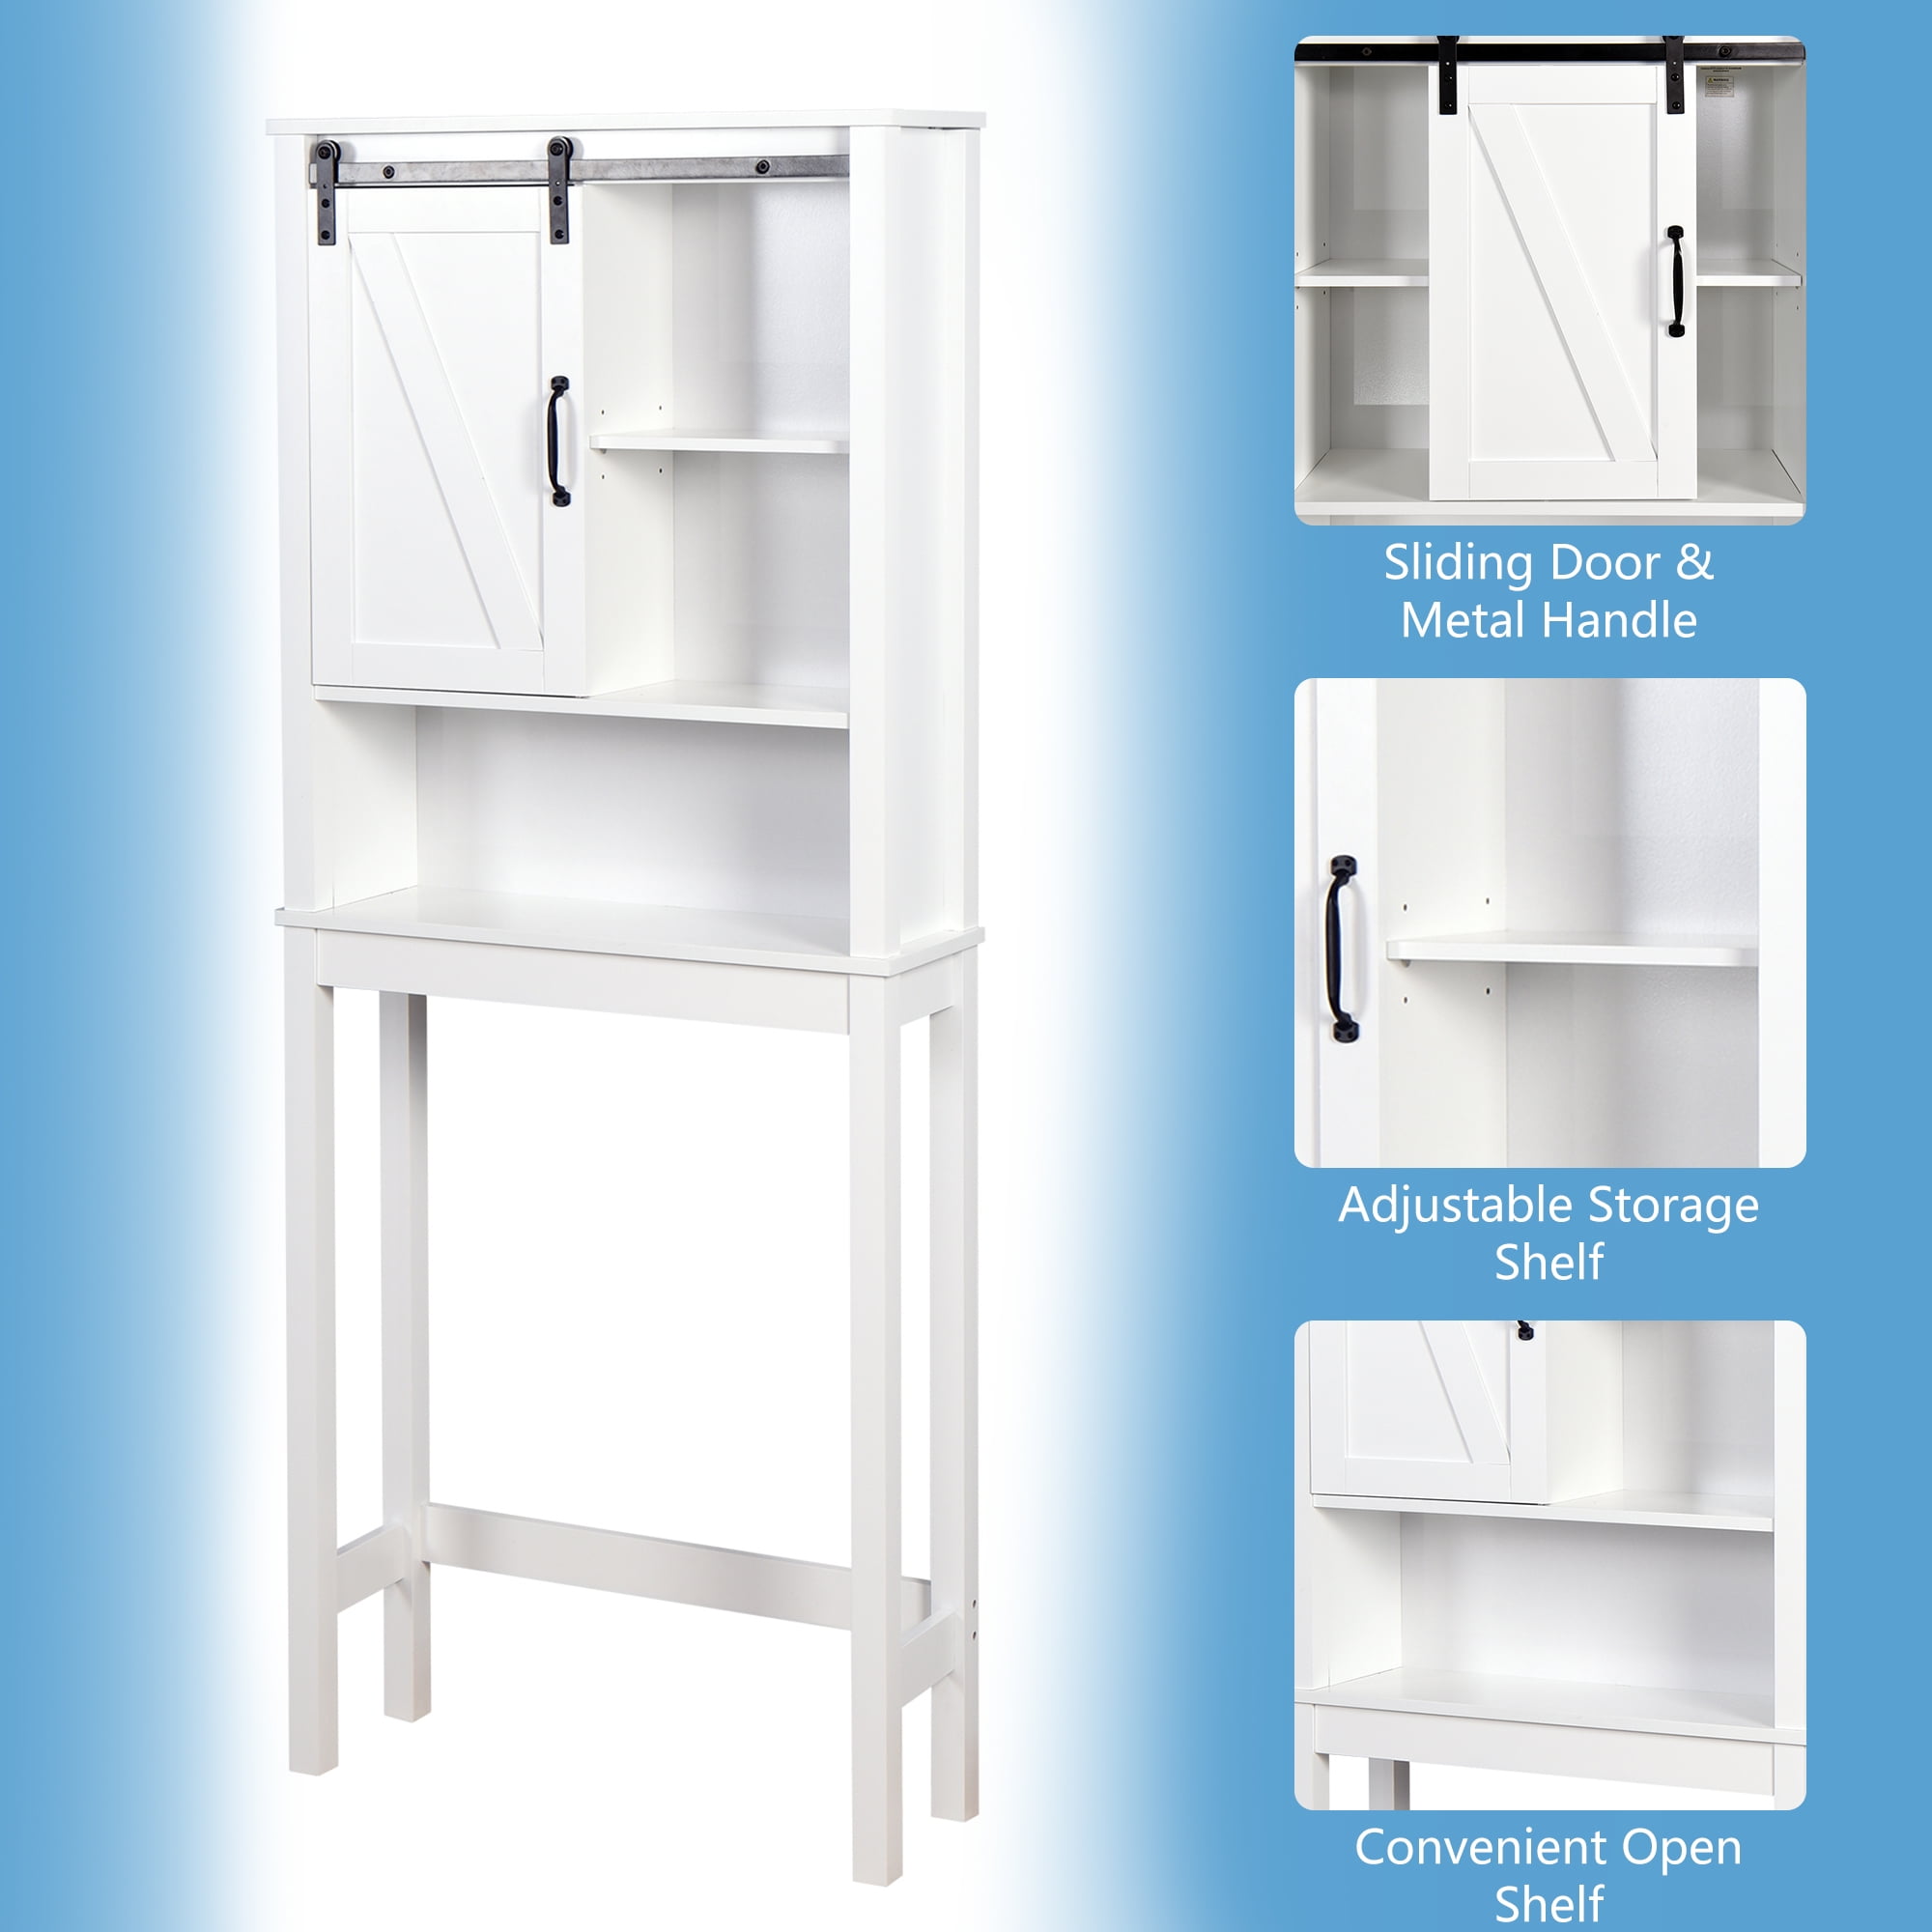 Nestl Bathroom Storage Organizer - Floor Standing with Shelves - Includes 2 Apothecary Jars - Tall Bathroom Storage Cabinet for Toilet Paper, Towel 